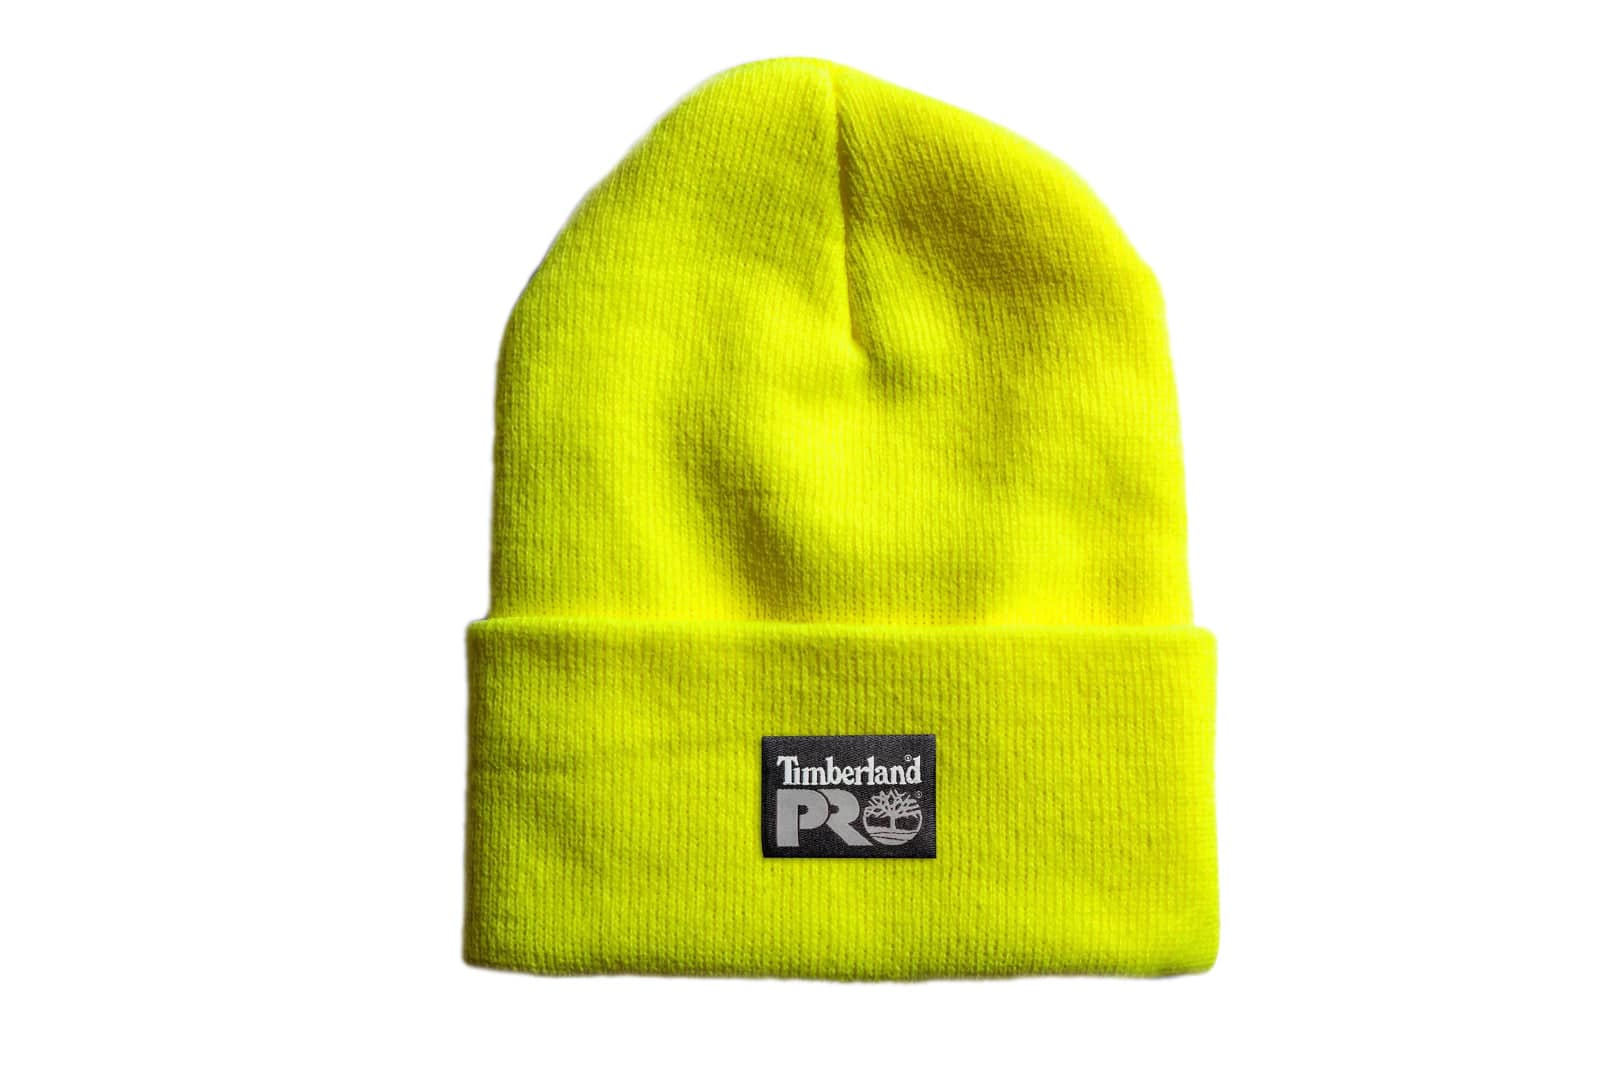 Timberland Pro Essential Pro Yellow Watch Cap- Style #A1V98 C77